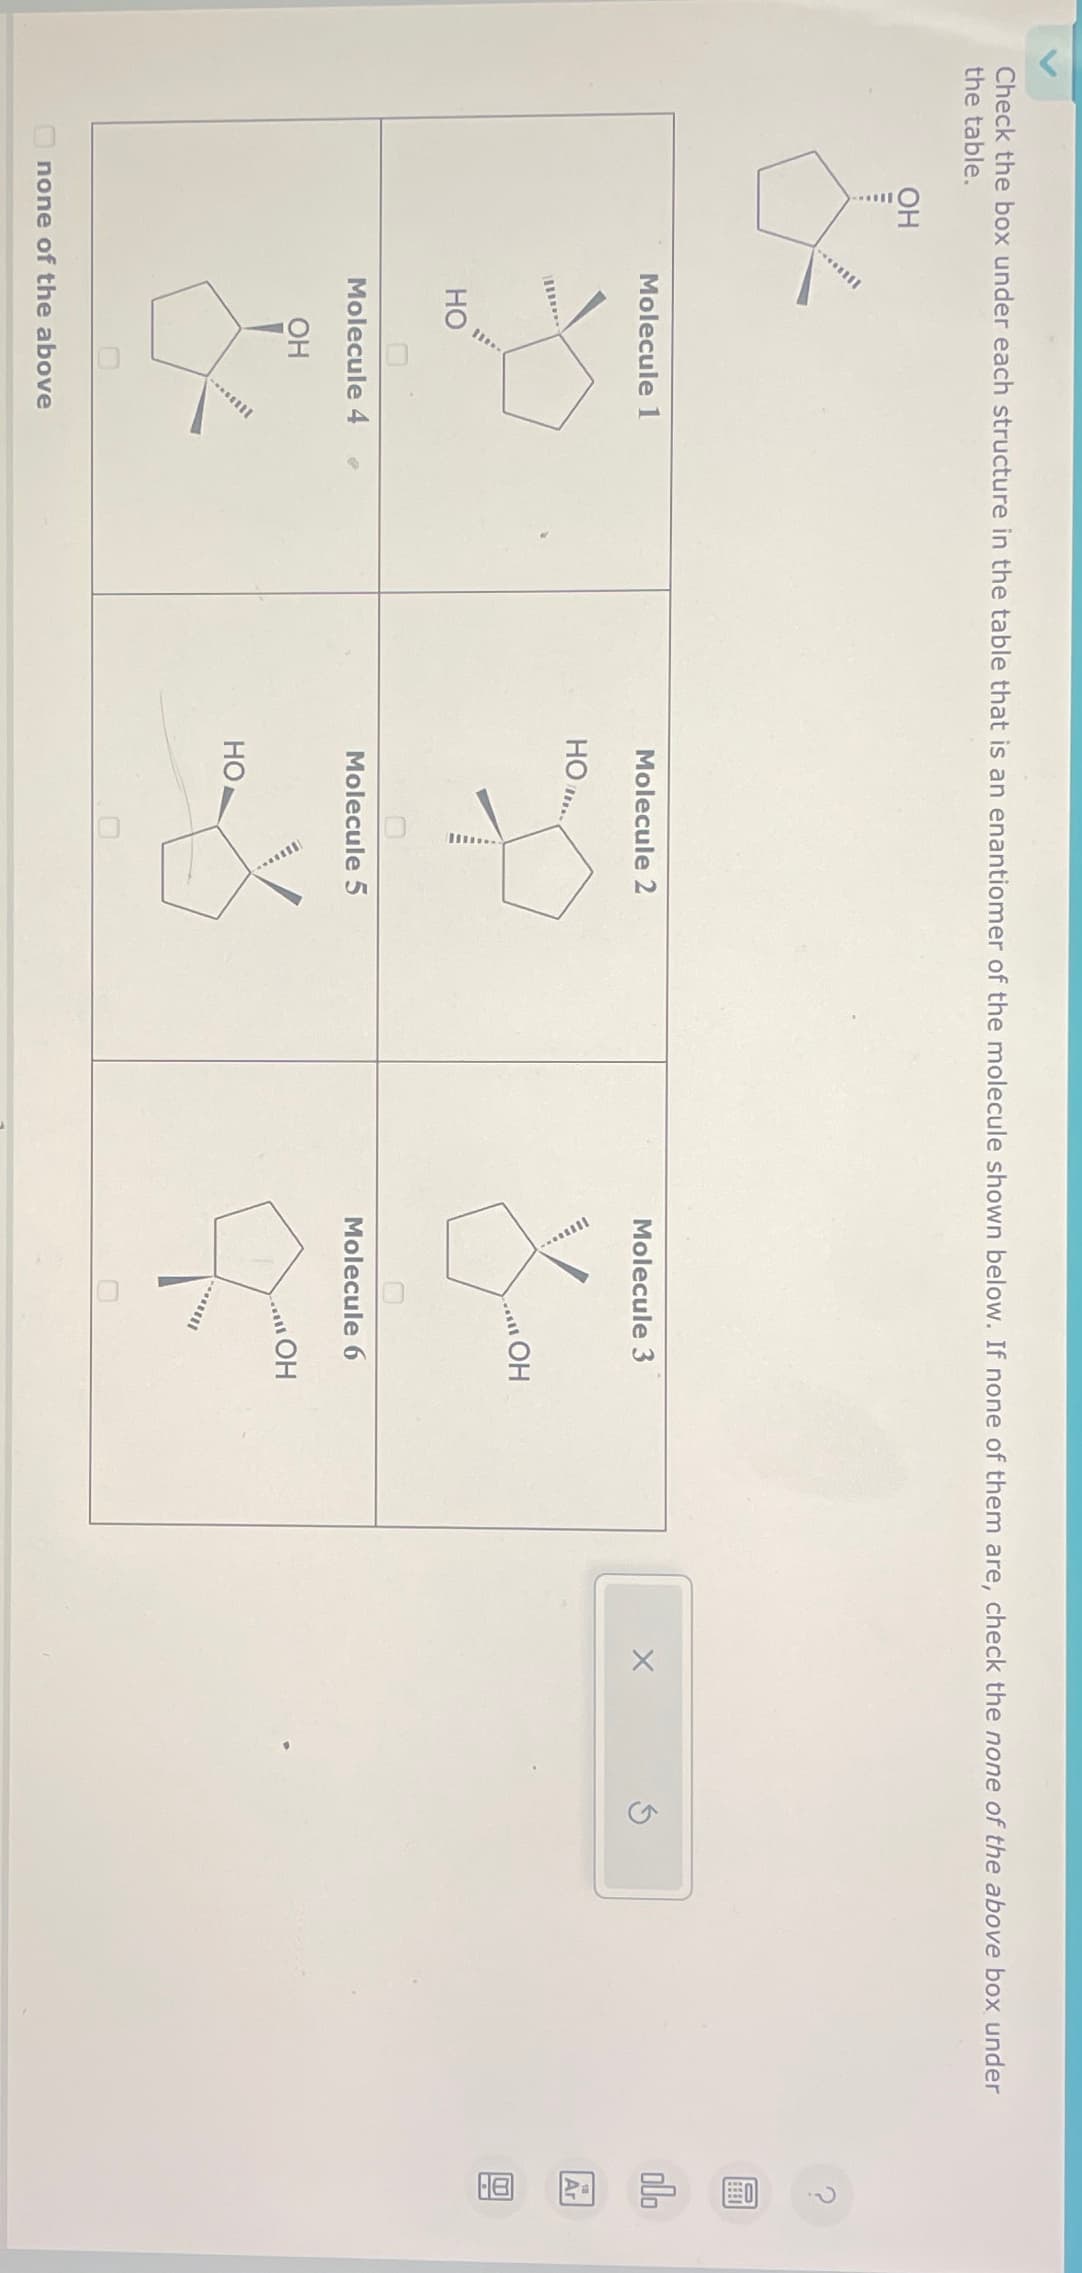 Check the box under each structure in the table that is an enantiomer of the molecule shown below. If none of them are, check the none of the above box under
the table.
OH
&
....
Molecule 1
HO
Molecule 4
OH
--
none of the above
Molecule 2
HO
In..
Molecule 5
HO
X
Molecule 3
sil
OH
Molecule 6
.....
OH
X
Ś
000
Ar
18